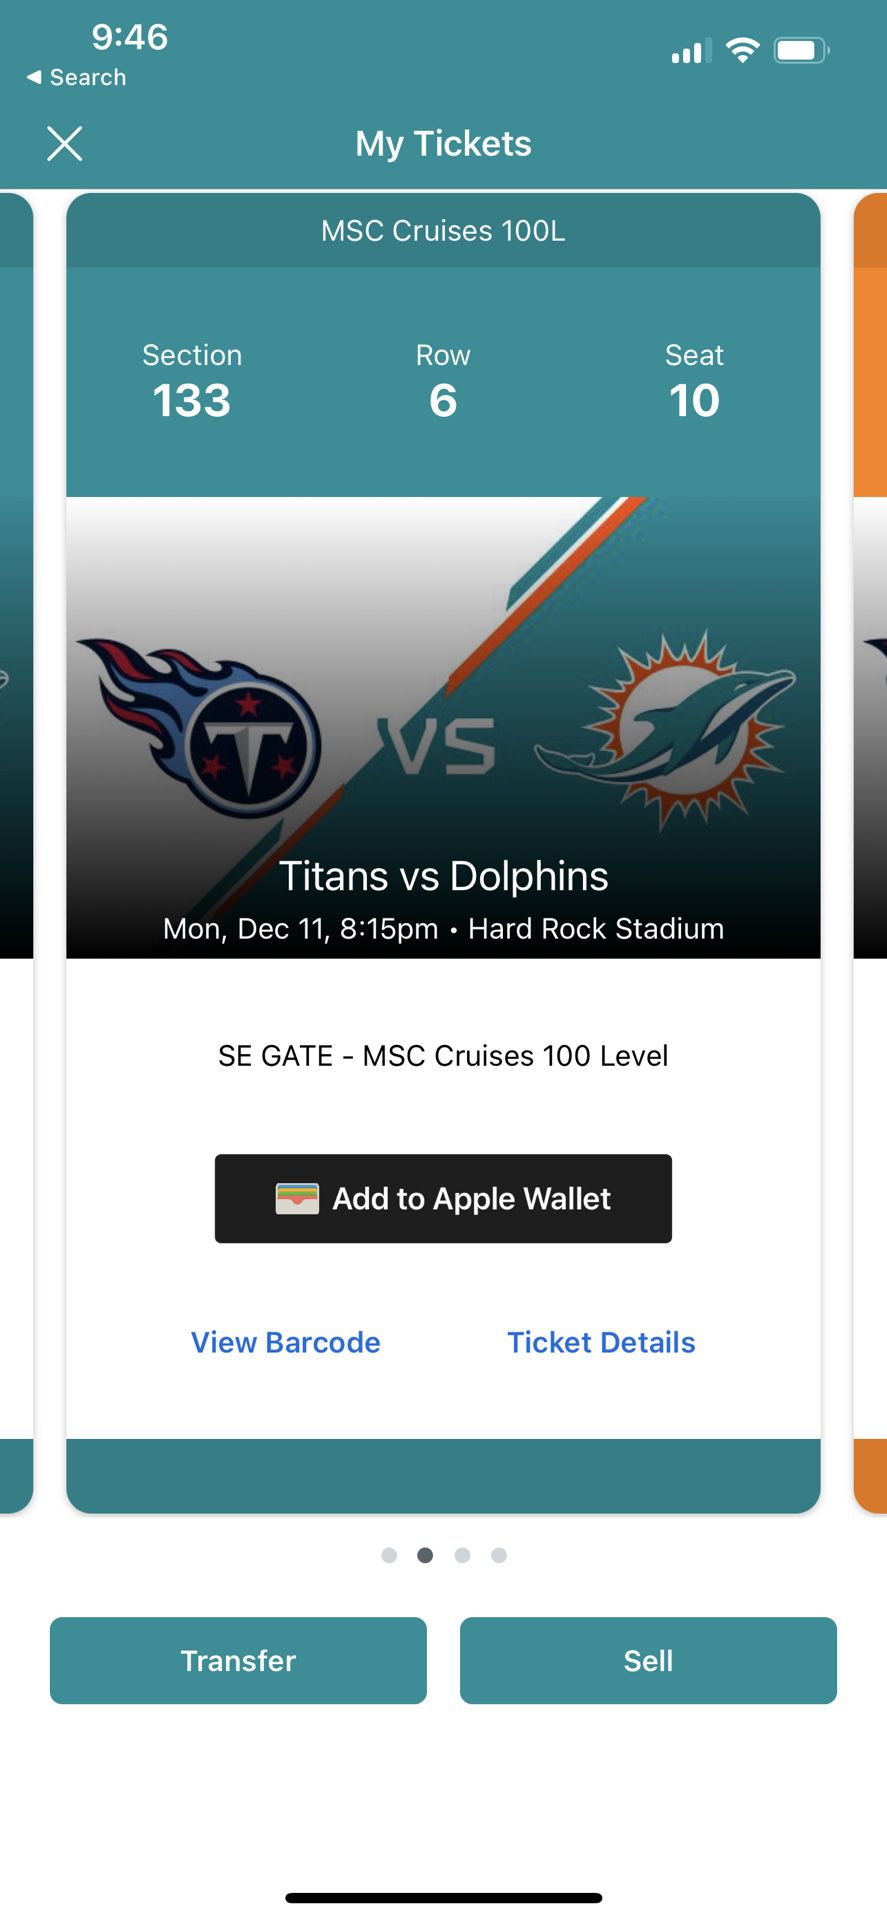 Lower bowl Row 6 Monday night football Tennessee Titans V. Miami Dolphins